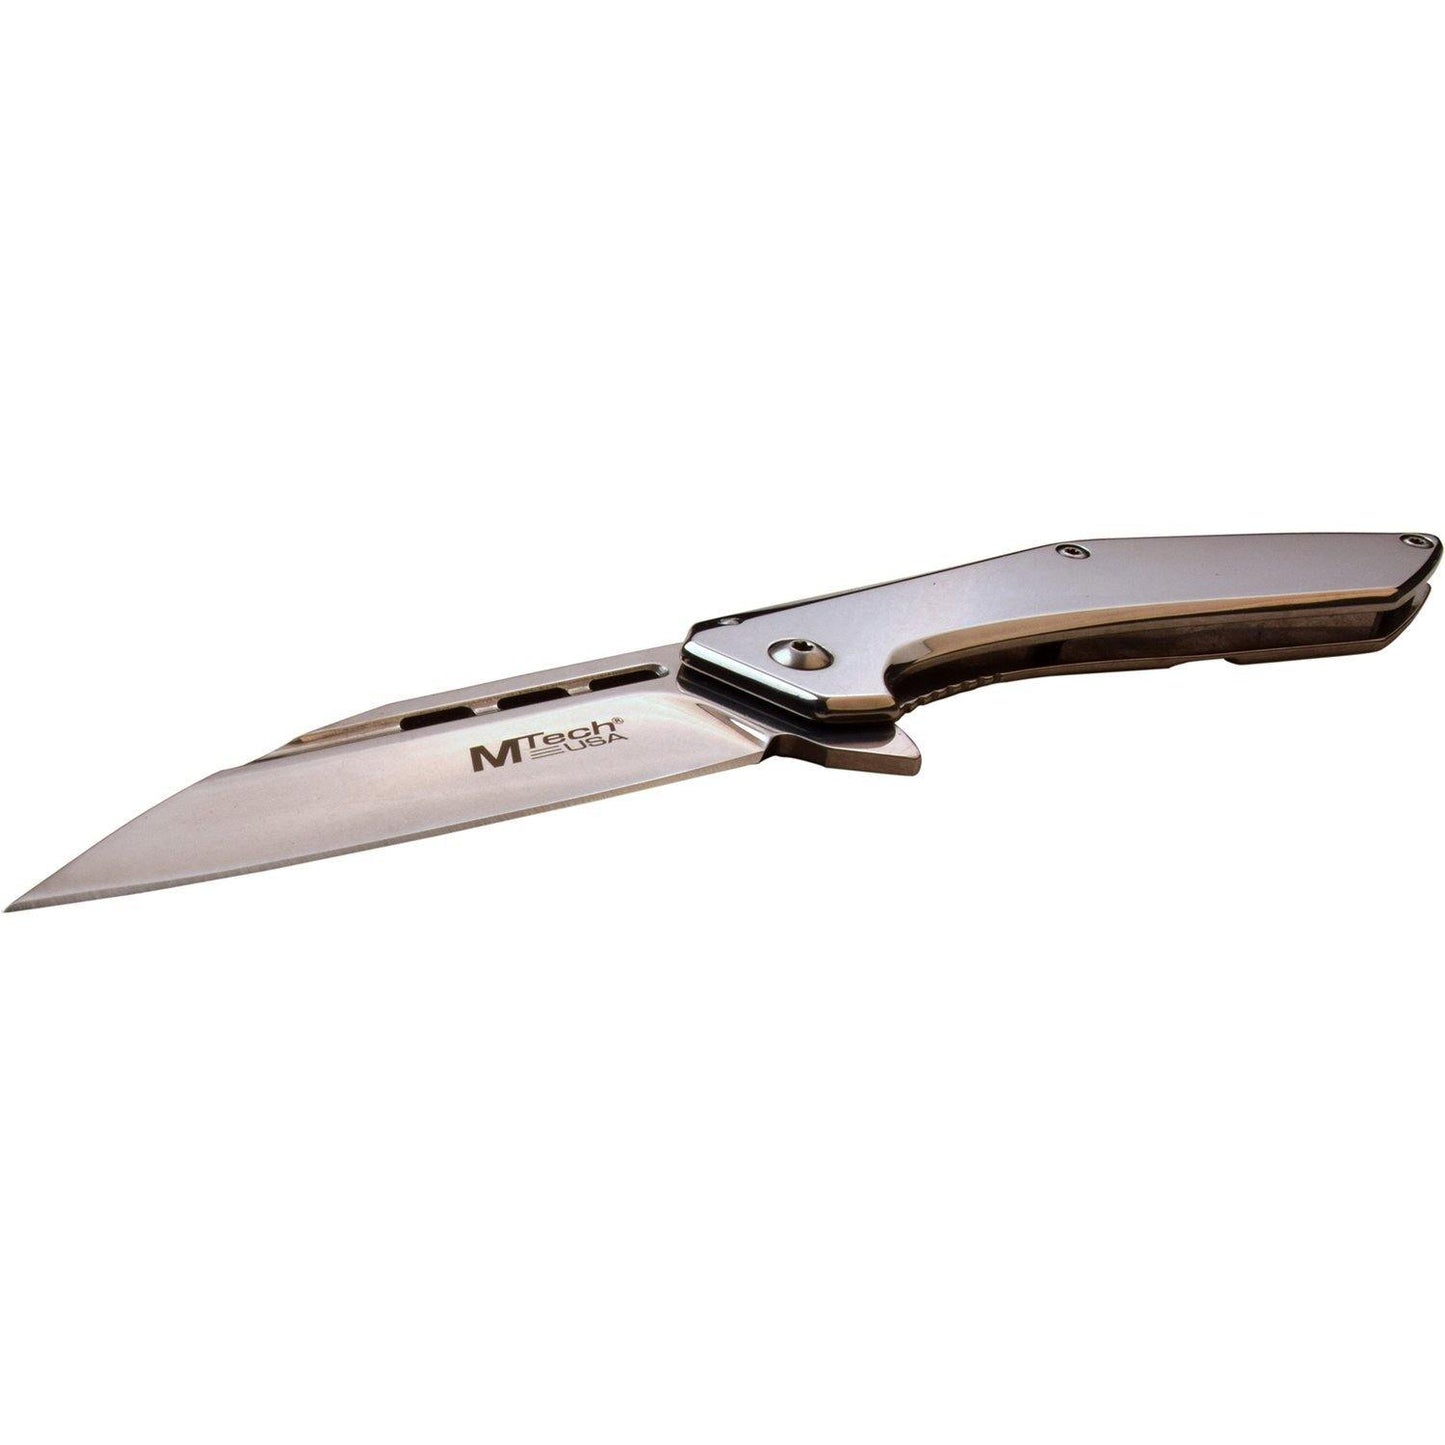 Mtech Wharncliffe Fine Edge Blade Folding Knife - 7.75 Inches Overall #mt-1052Mr - Xhunter New Zealand